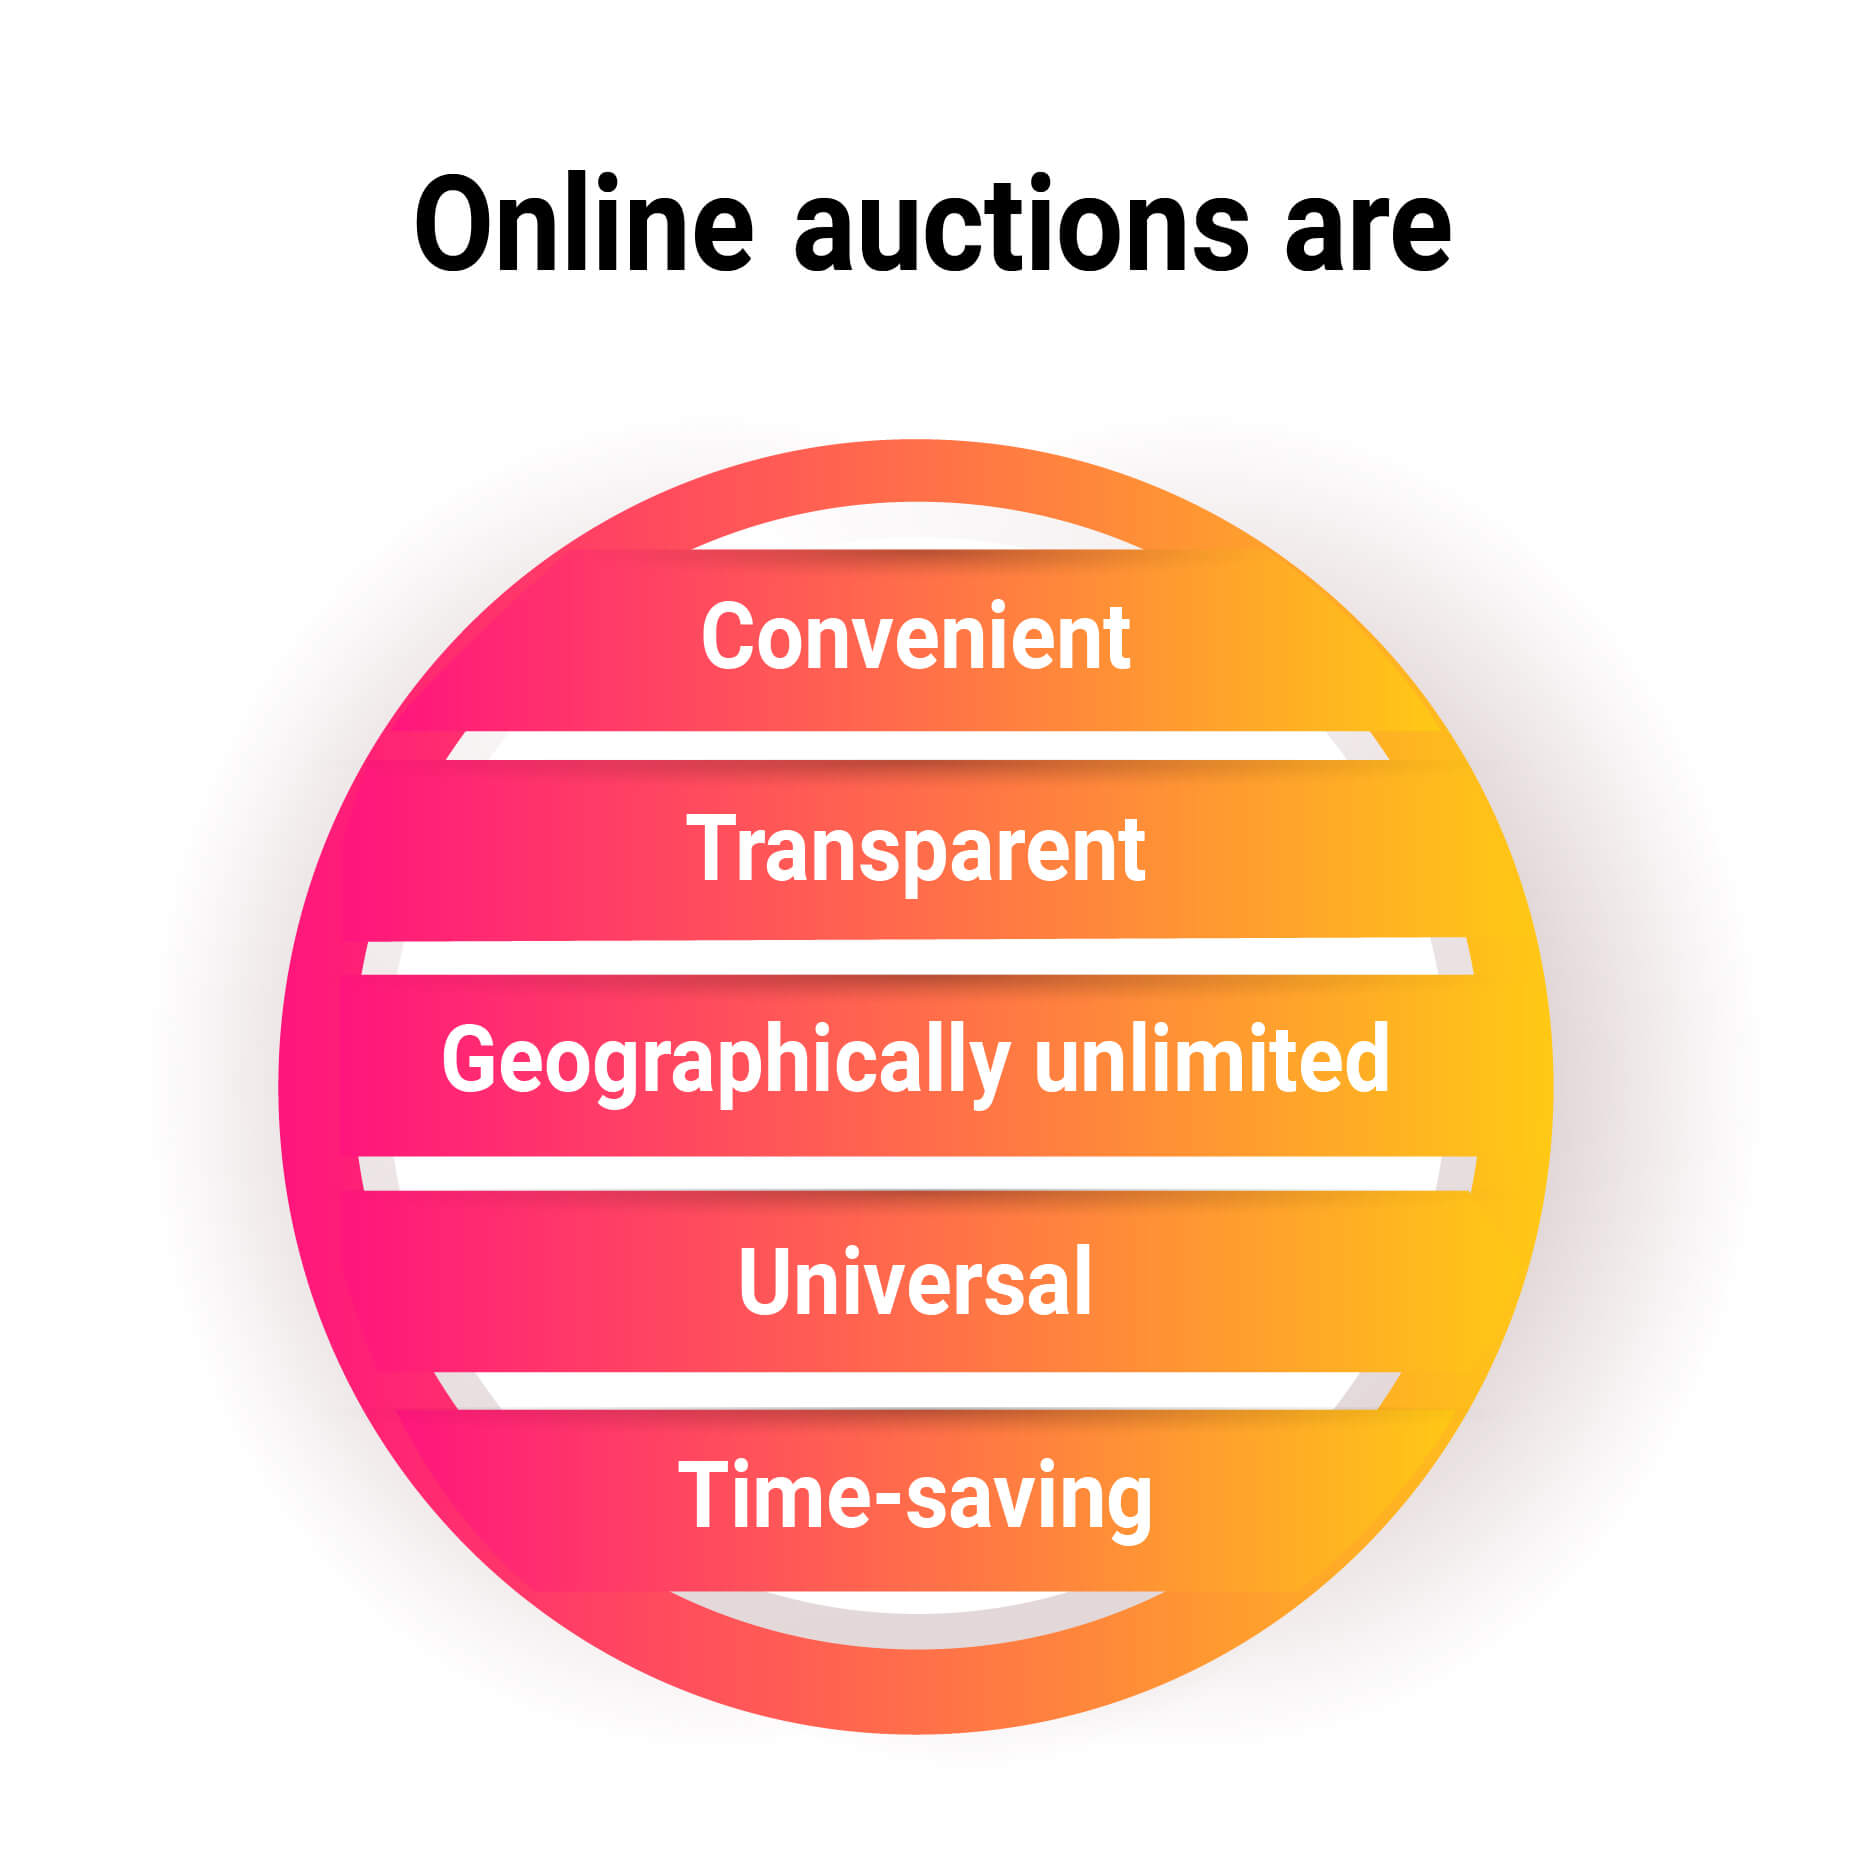 Online auctions are convenient, transparent, geographically unlimited, universal, and time-saving.